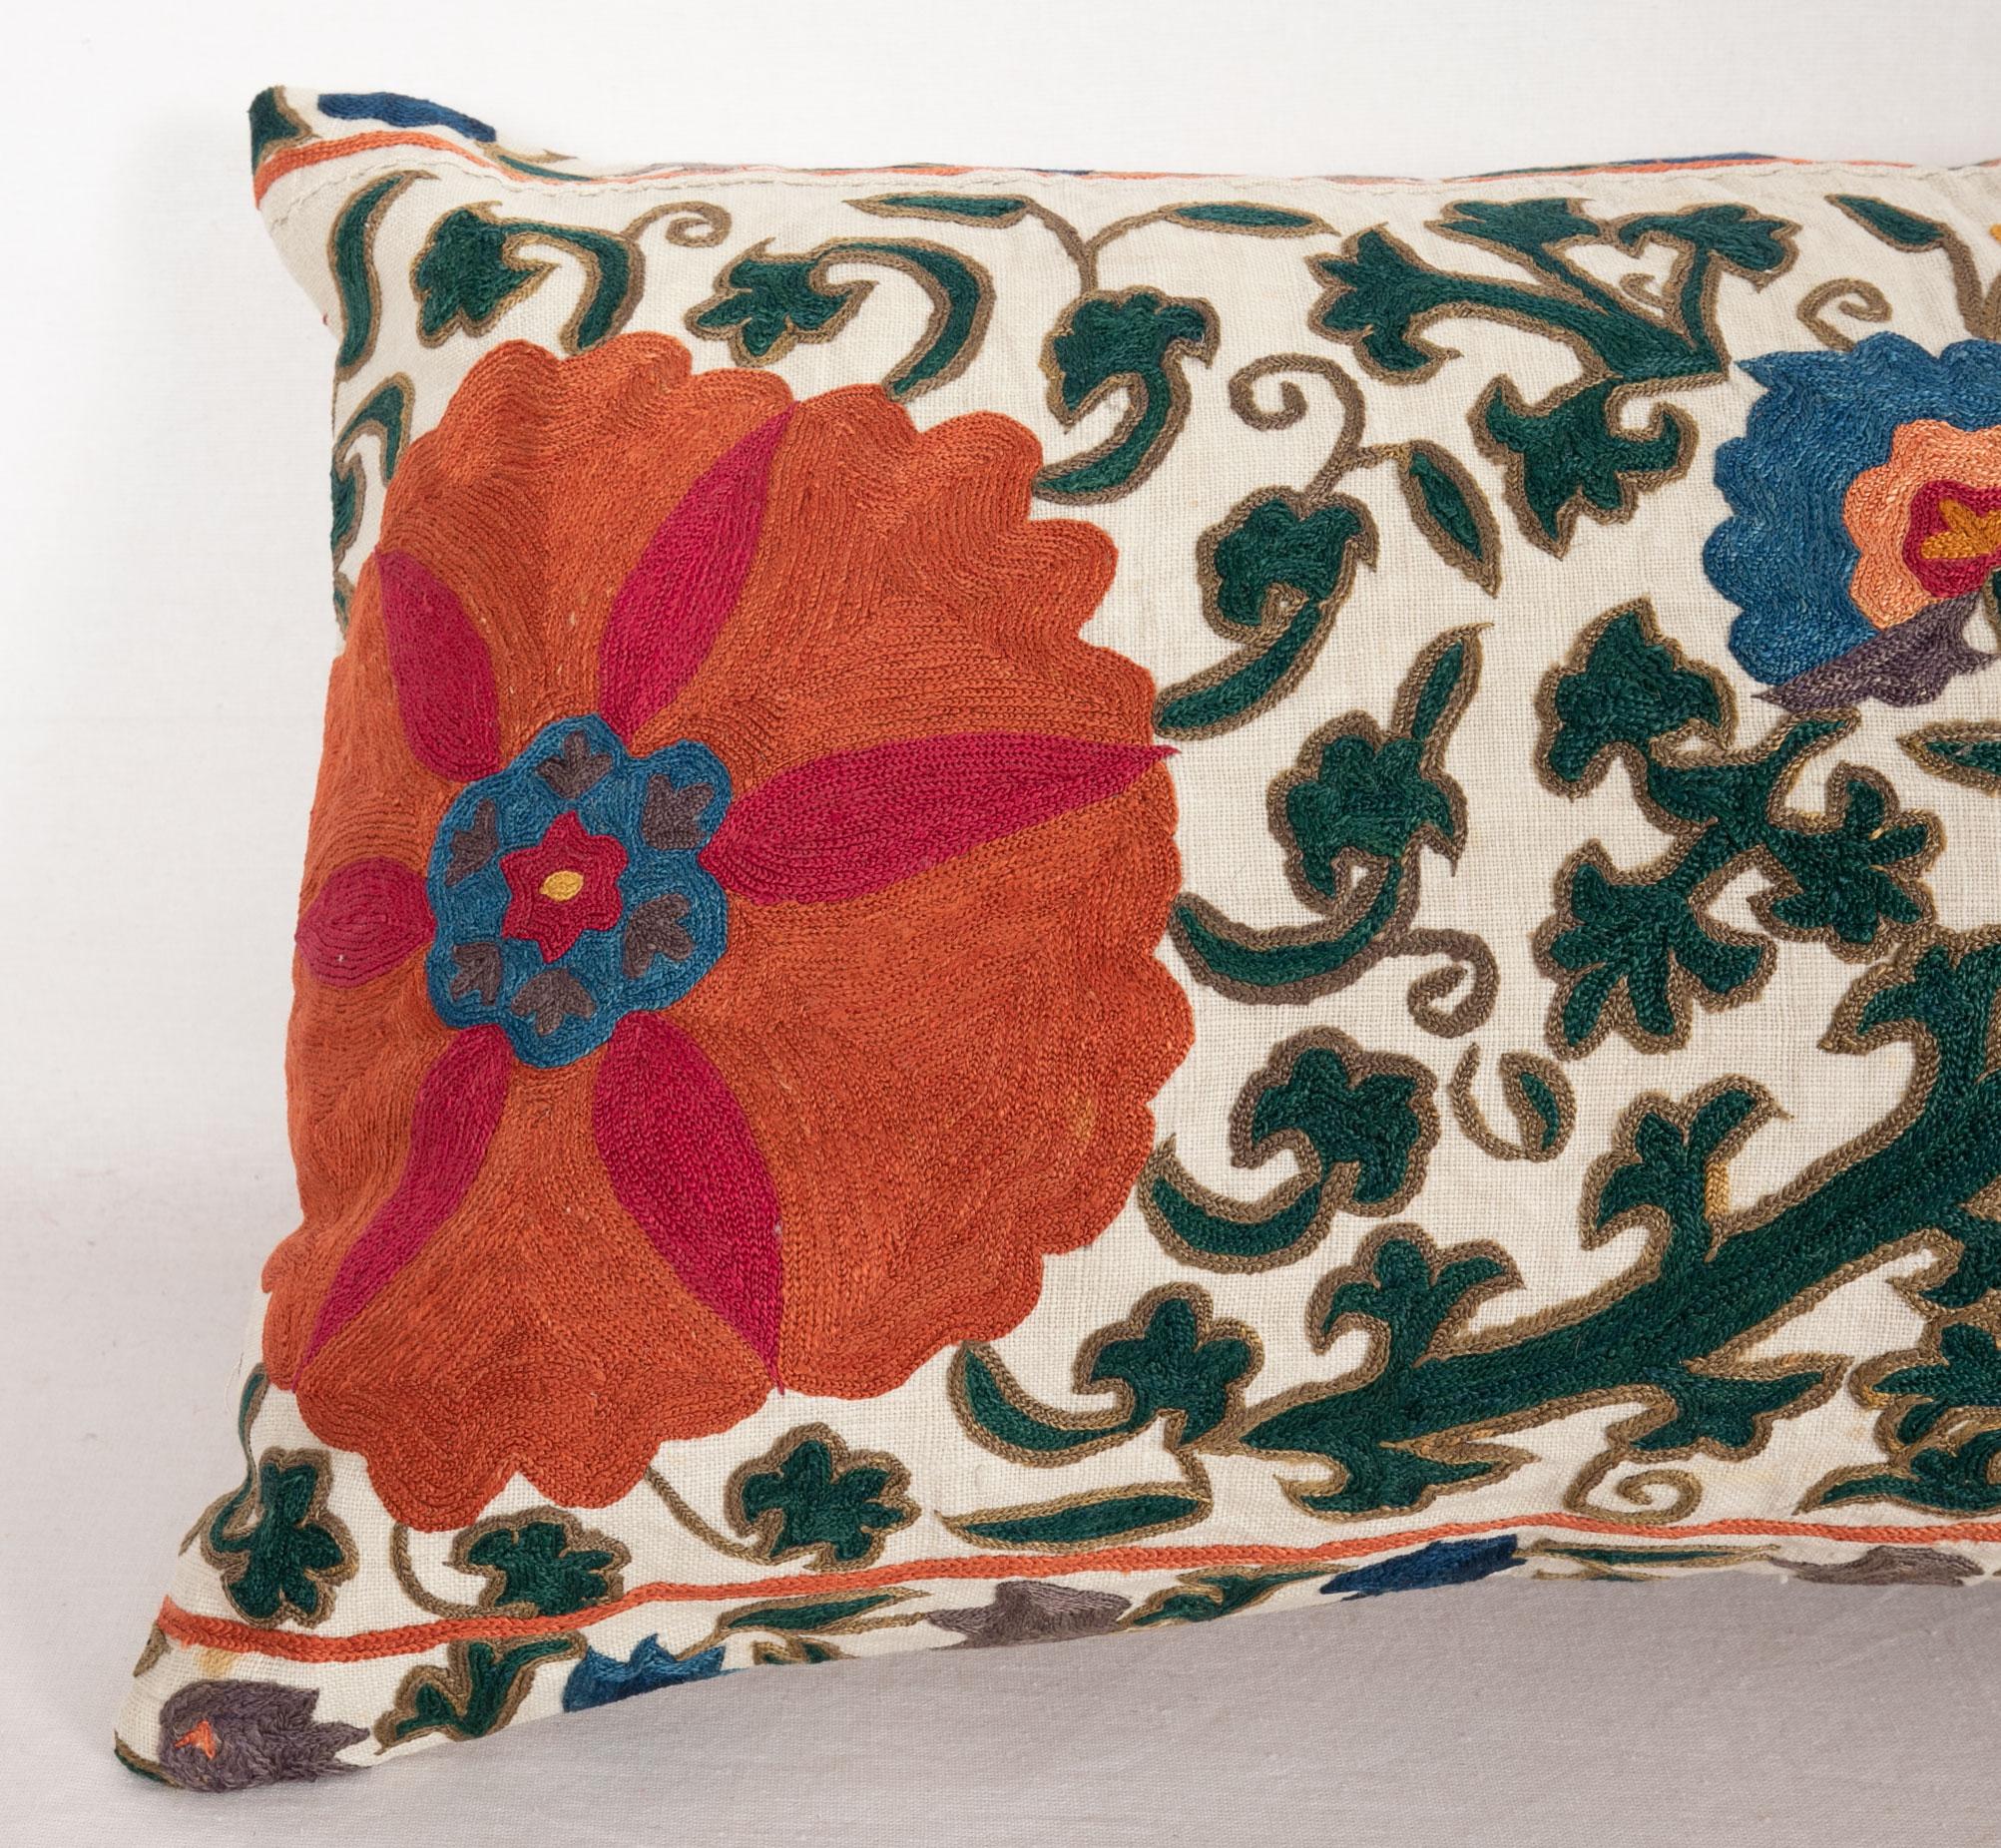 Embroidered Antique Suzani Pillow Case Fashioned from a 19th Century Suzani from Uzbekistan